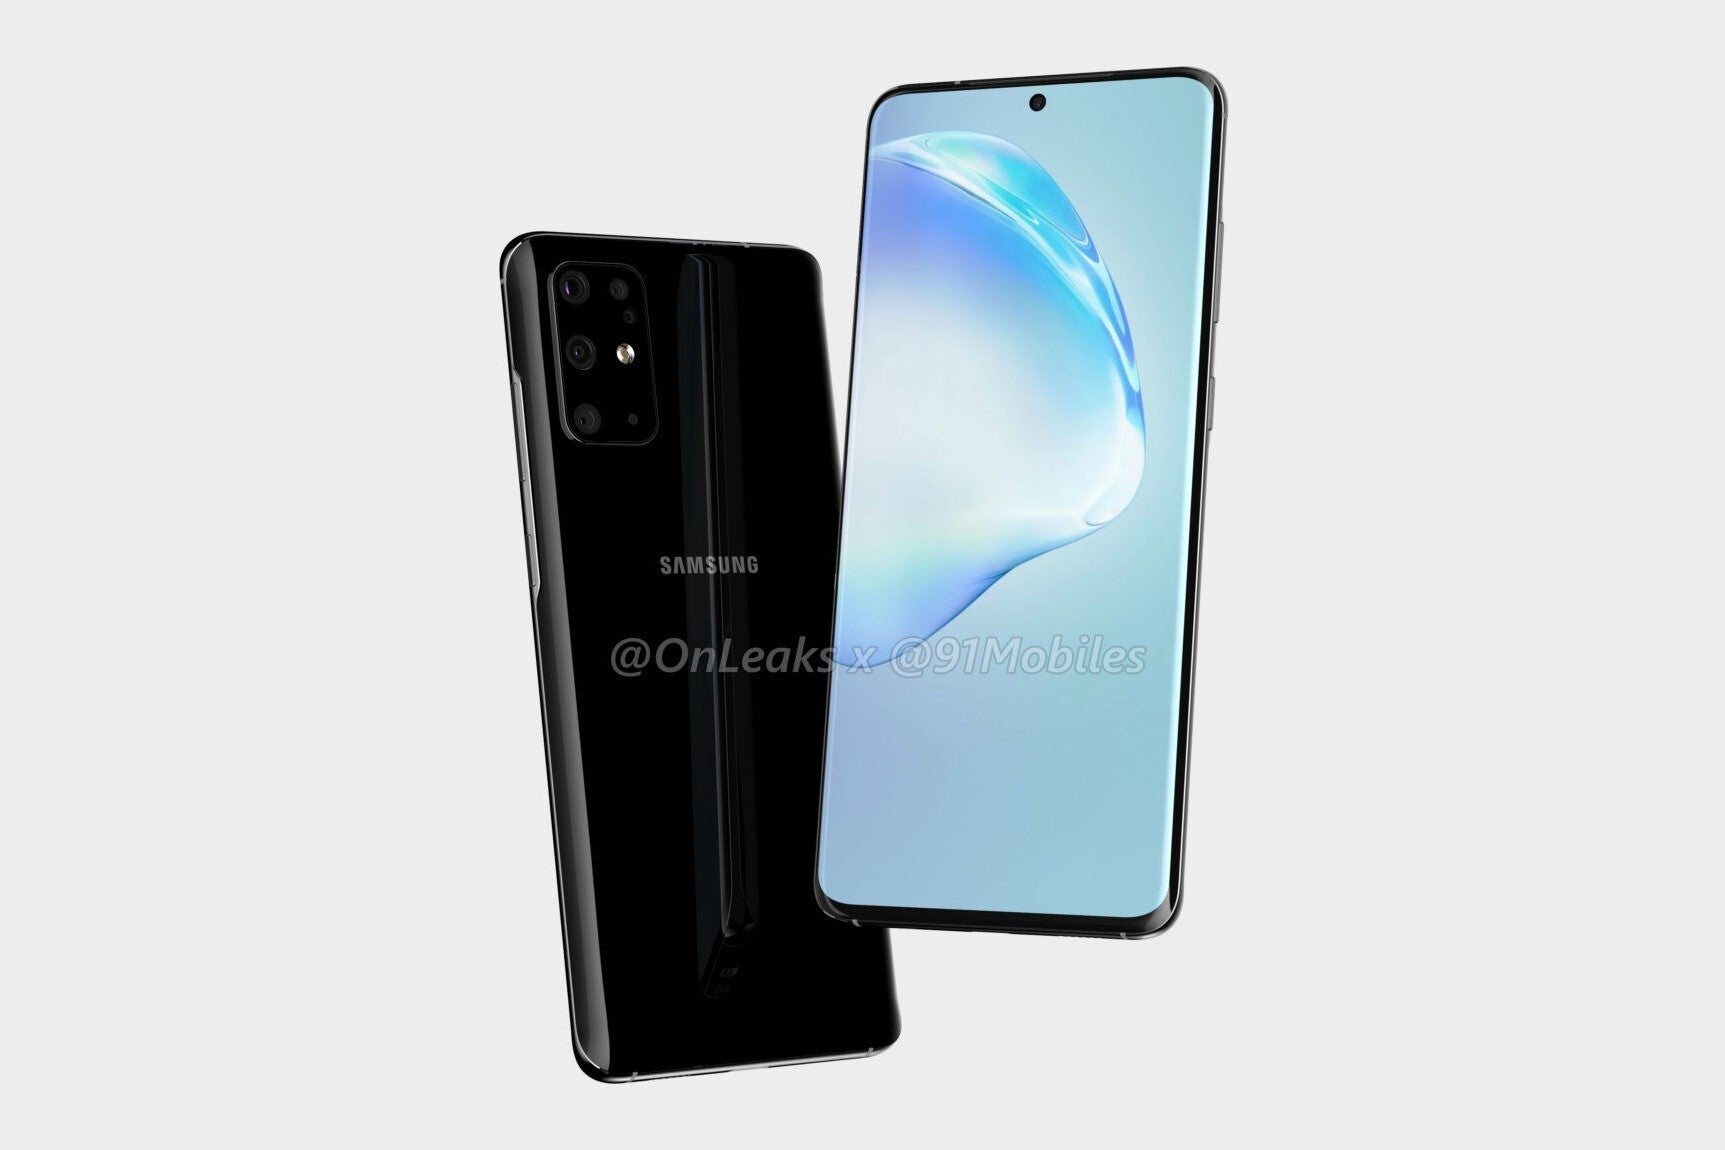 Samsung Galaxy S11 concept render based on CAD files - The Galaxy S11 will reportedly introduce a huge video recording upgrade